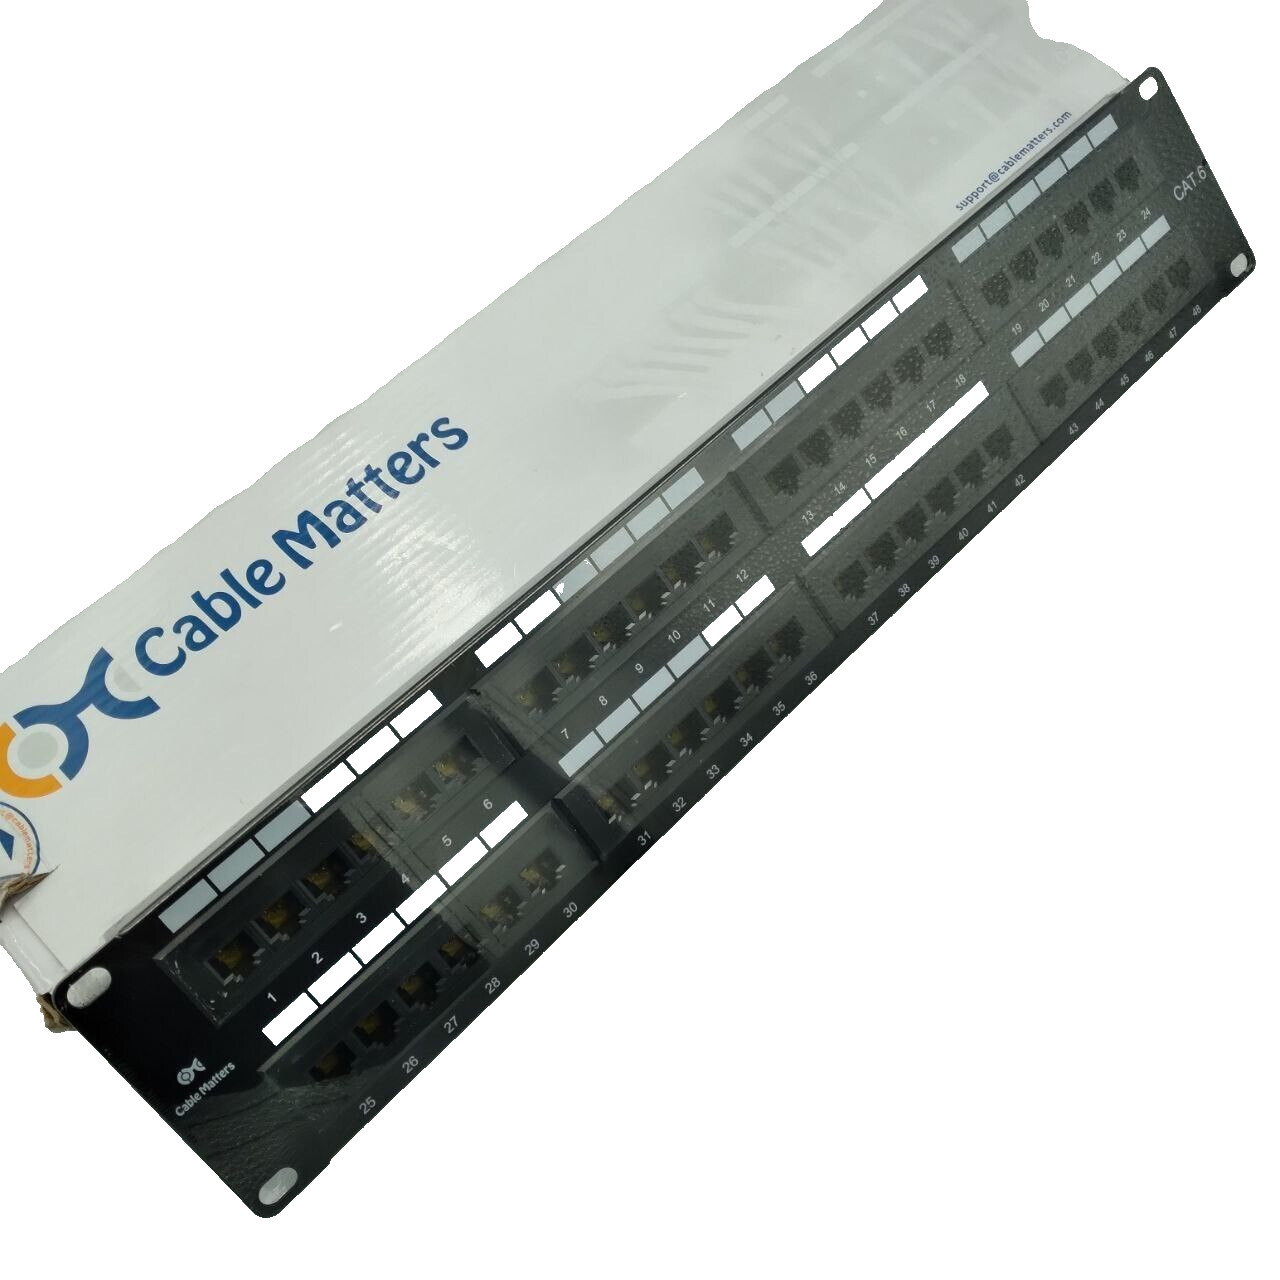 Cable Matters 24 Port Cat 6 Patch Panel 1U 19 Inch Rack or Wall Mount D Rings